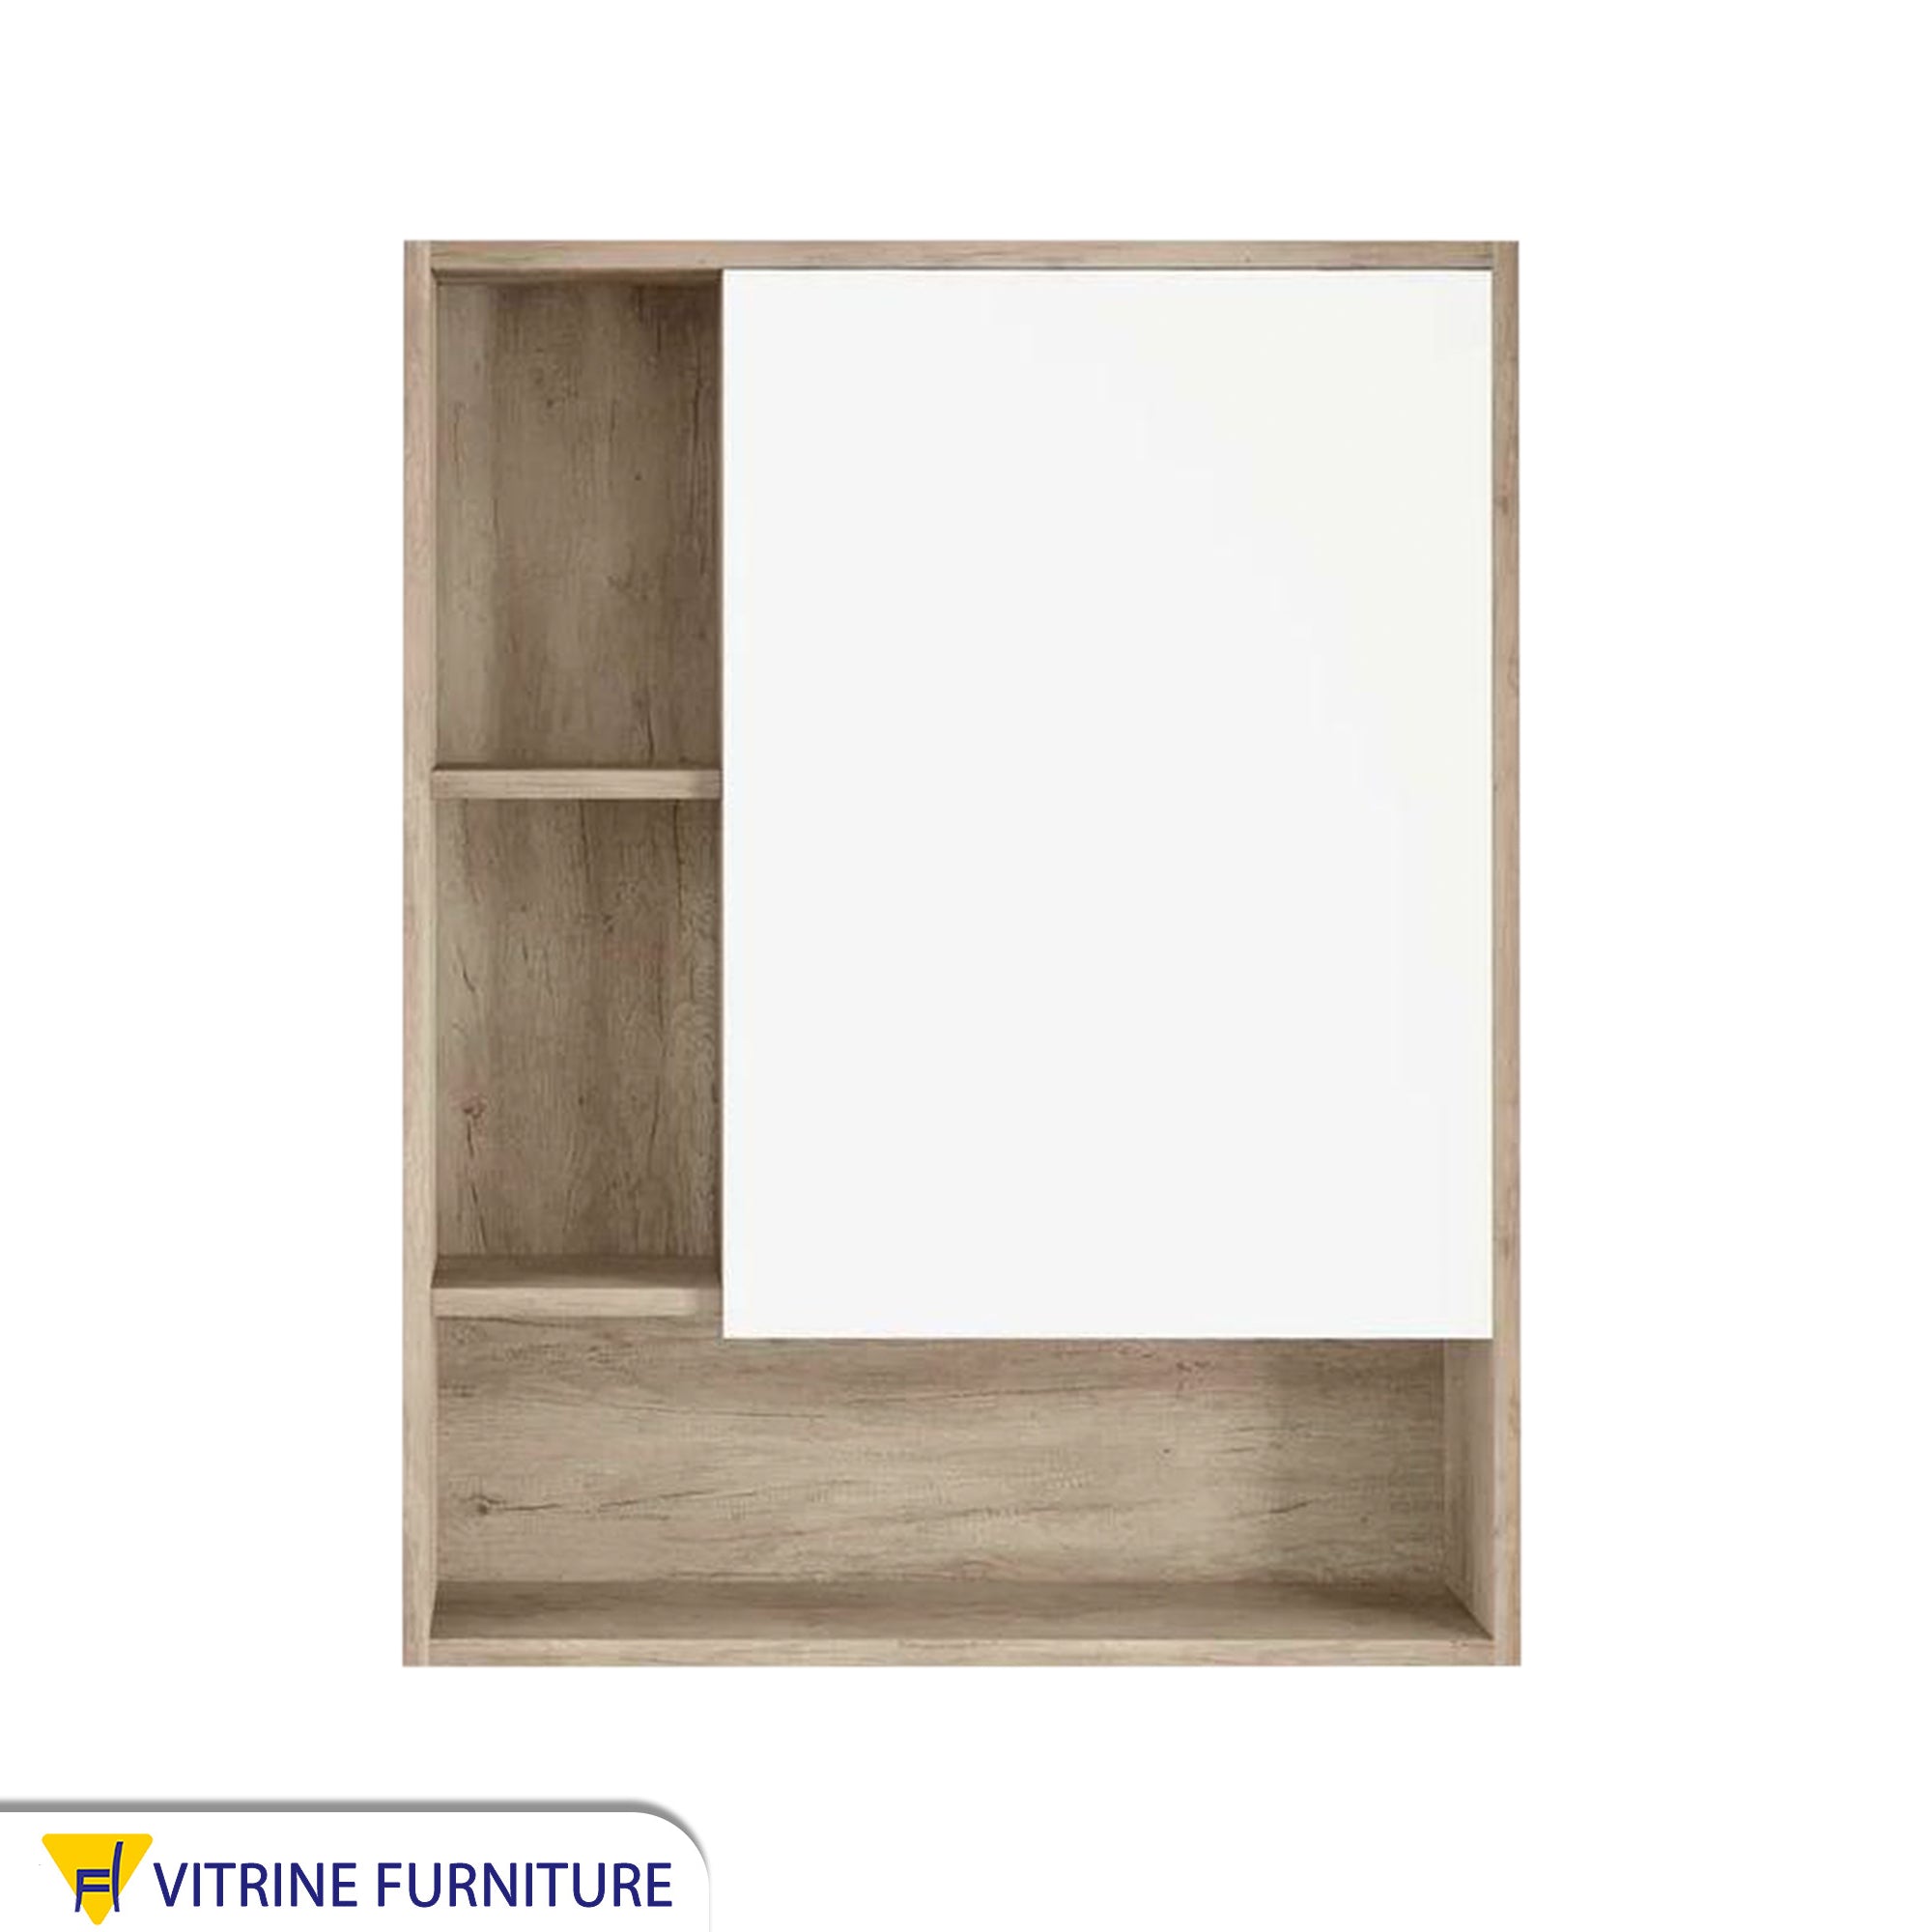 A pharmacy cabinet for the bathroom with a mirrored door and two side shelves